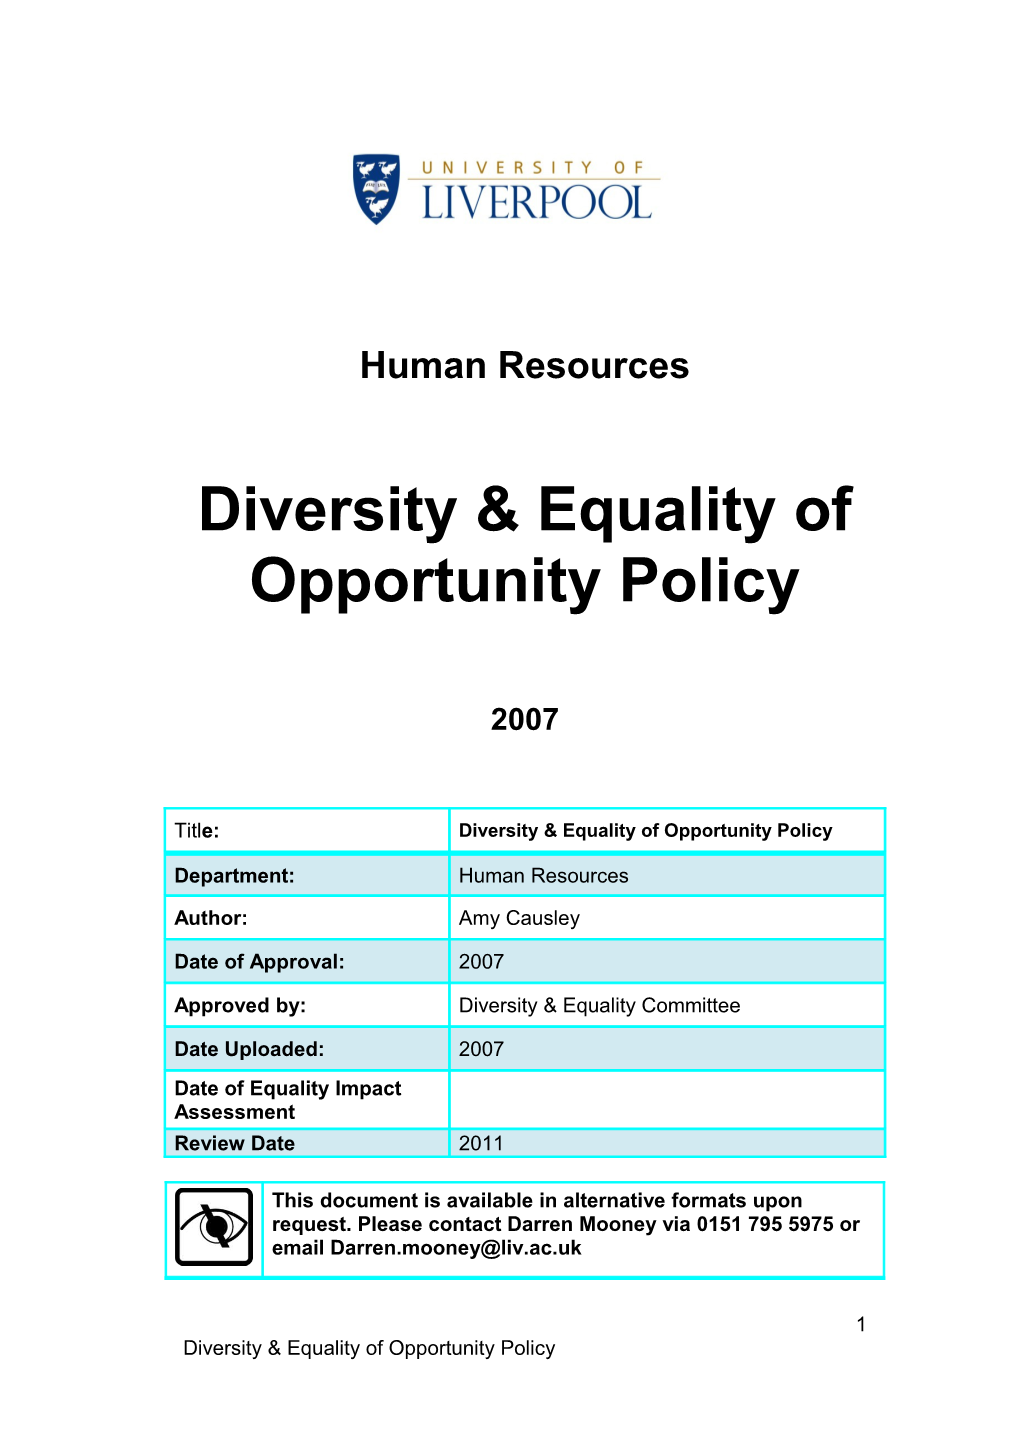 Diversity & Equality of Opportunity Policy